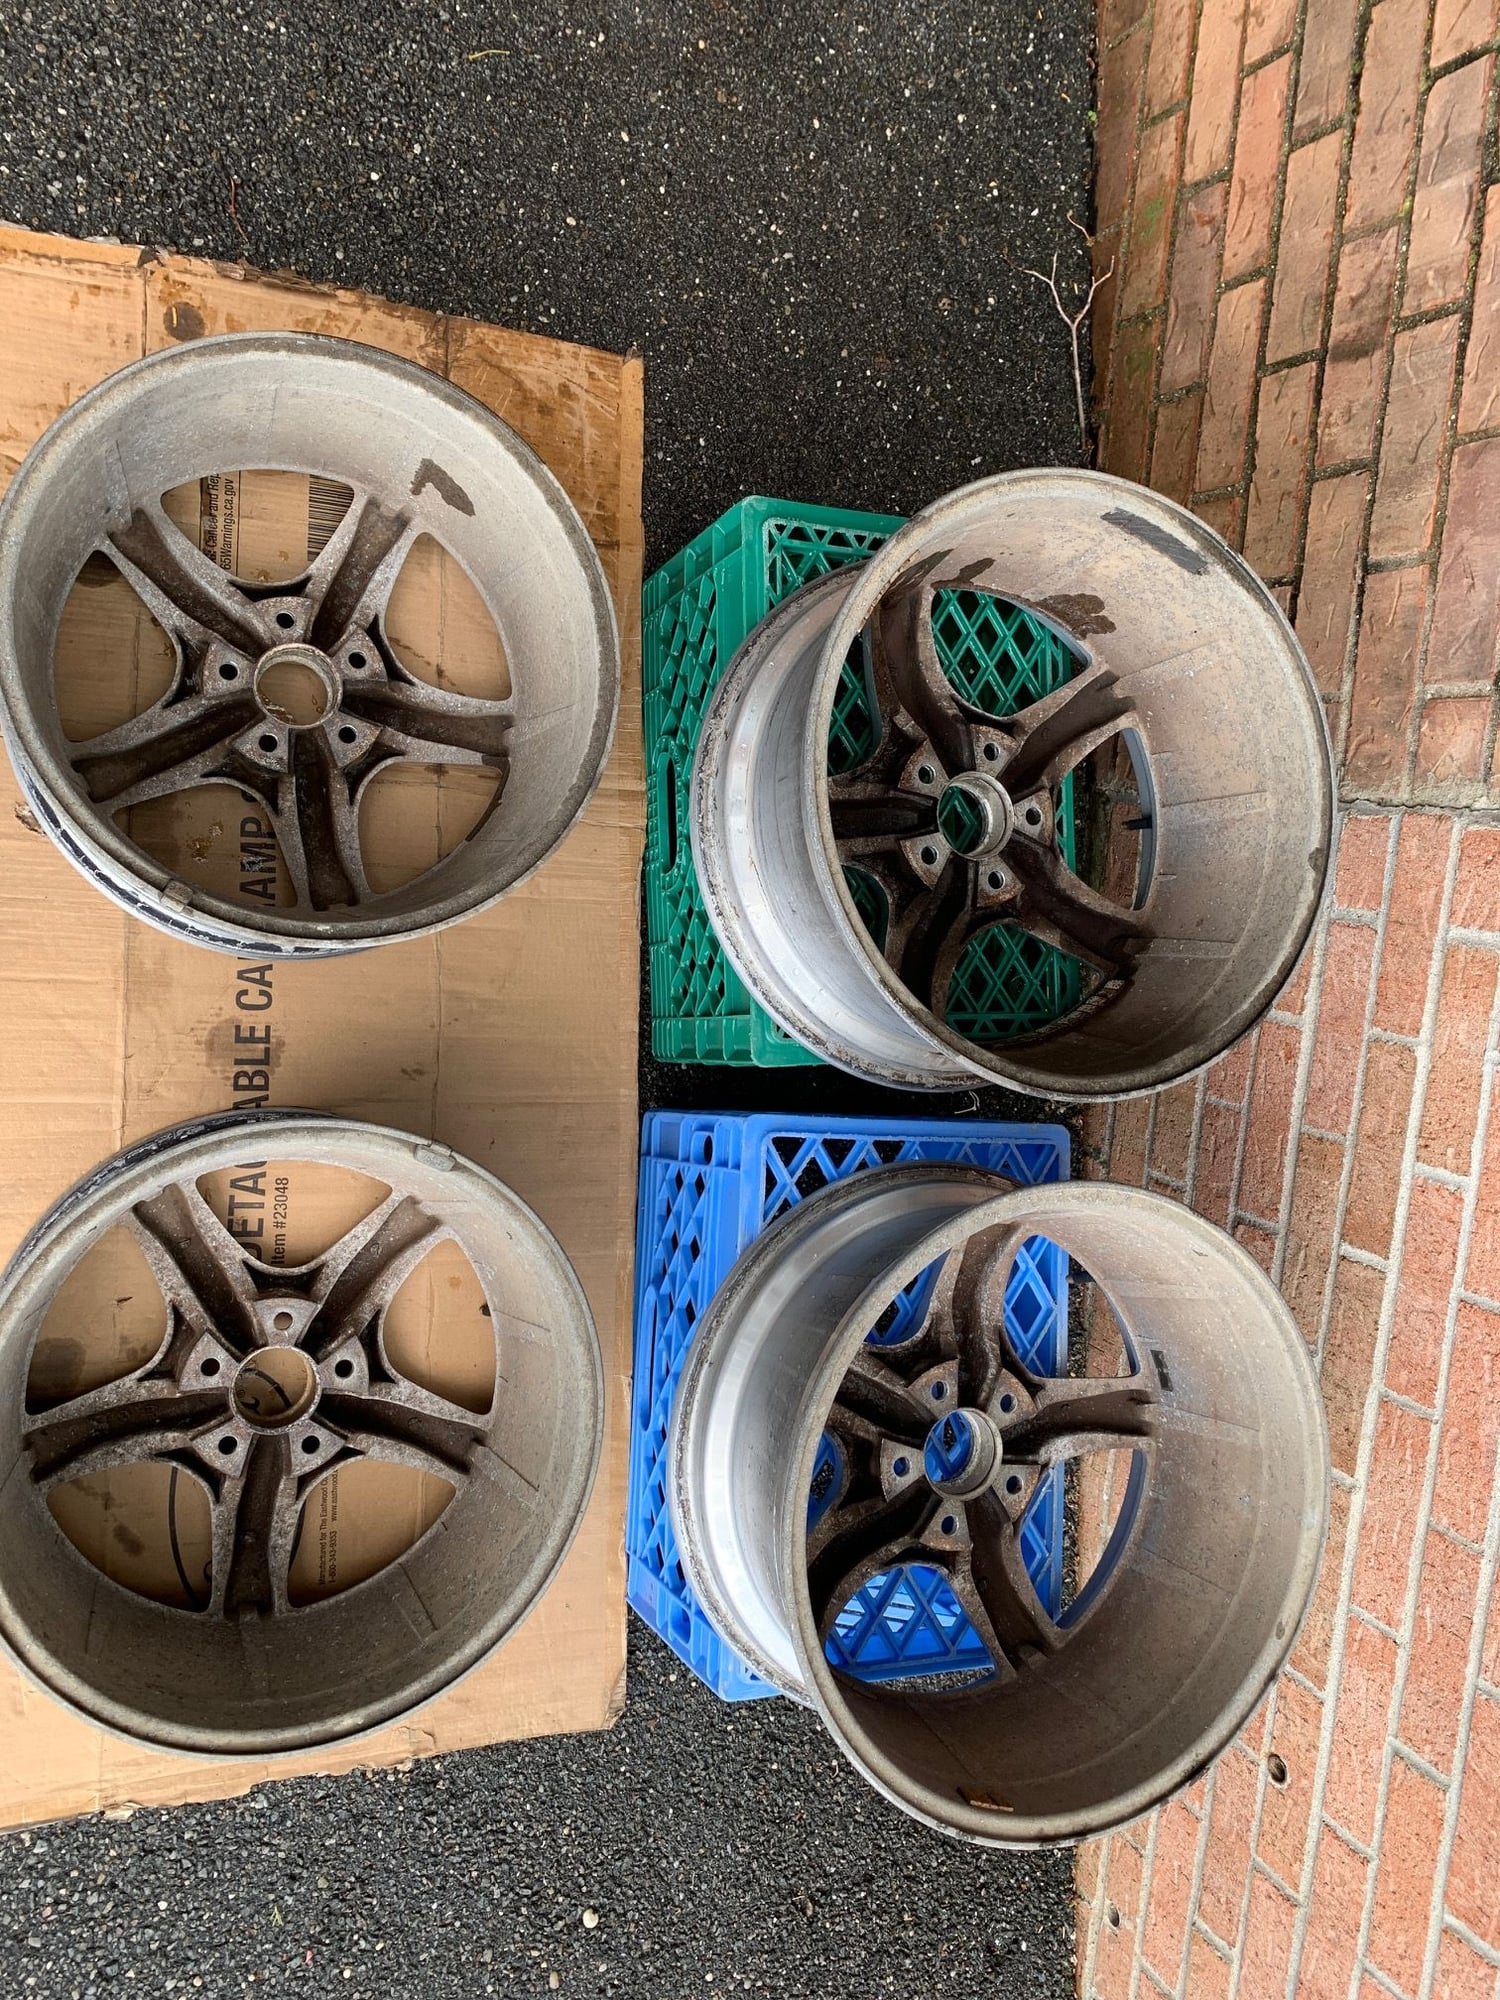 Wheels and Tires/Axles - 99 Spec 17" OEM RS wheels - Used - 0  All Models - Bayside, NY 11358, United States